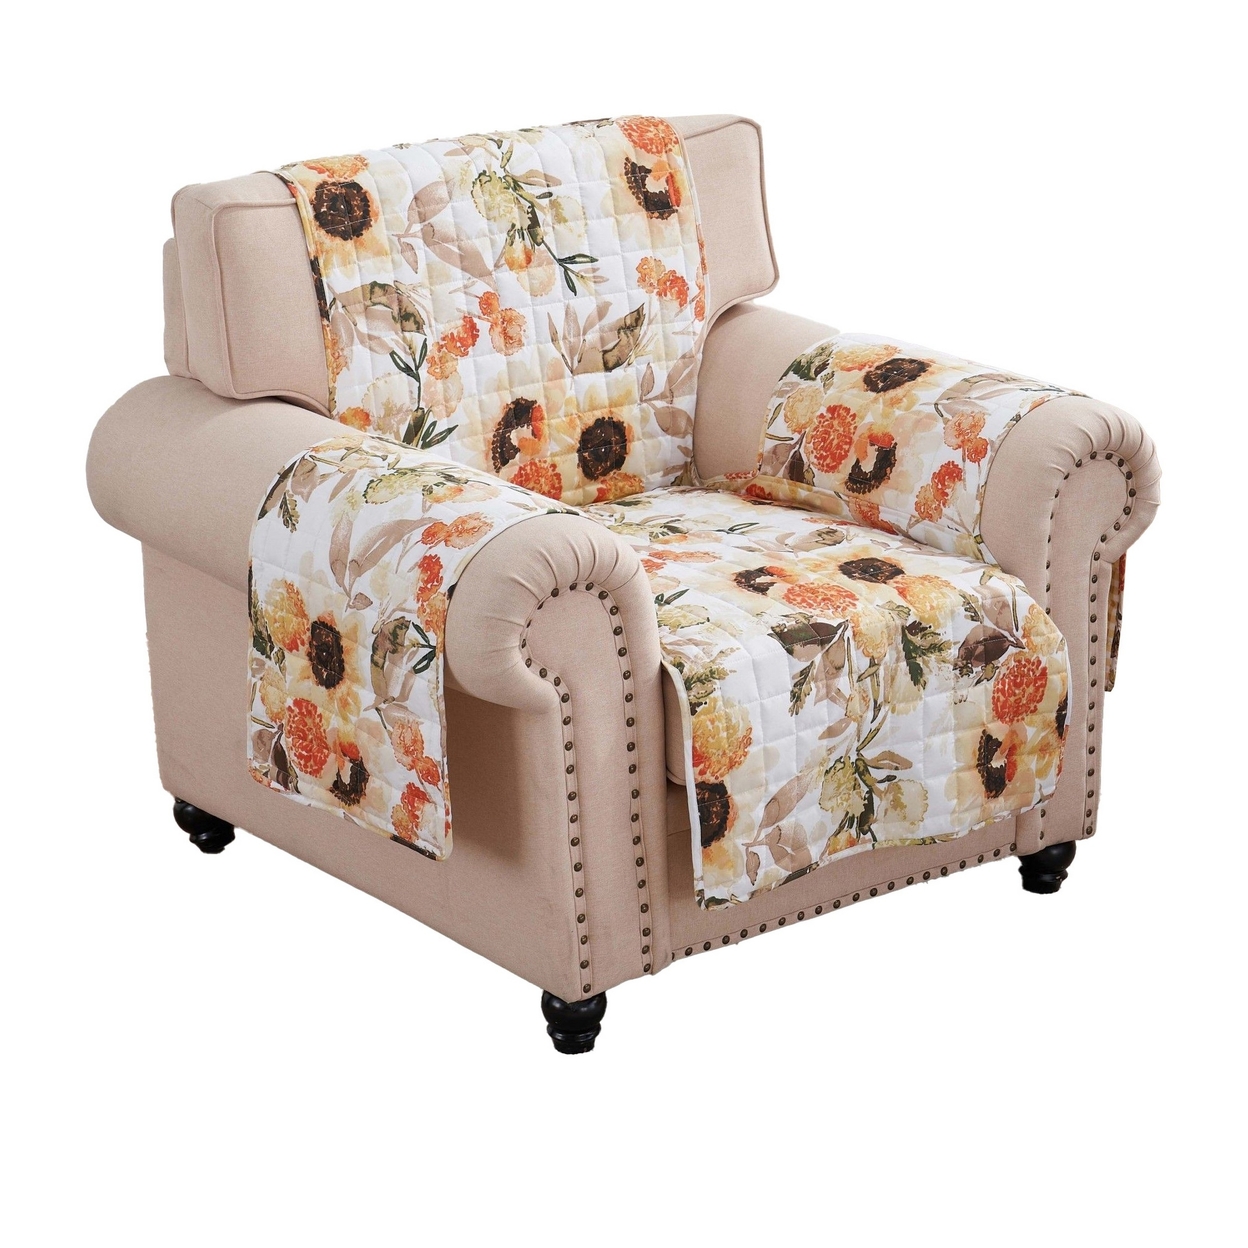 Kelsa 81 Inch Armchair Cover, Polyester Fill, Watercolor Sunflowers, Gold-Saltoro Sherpi